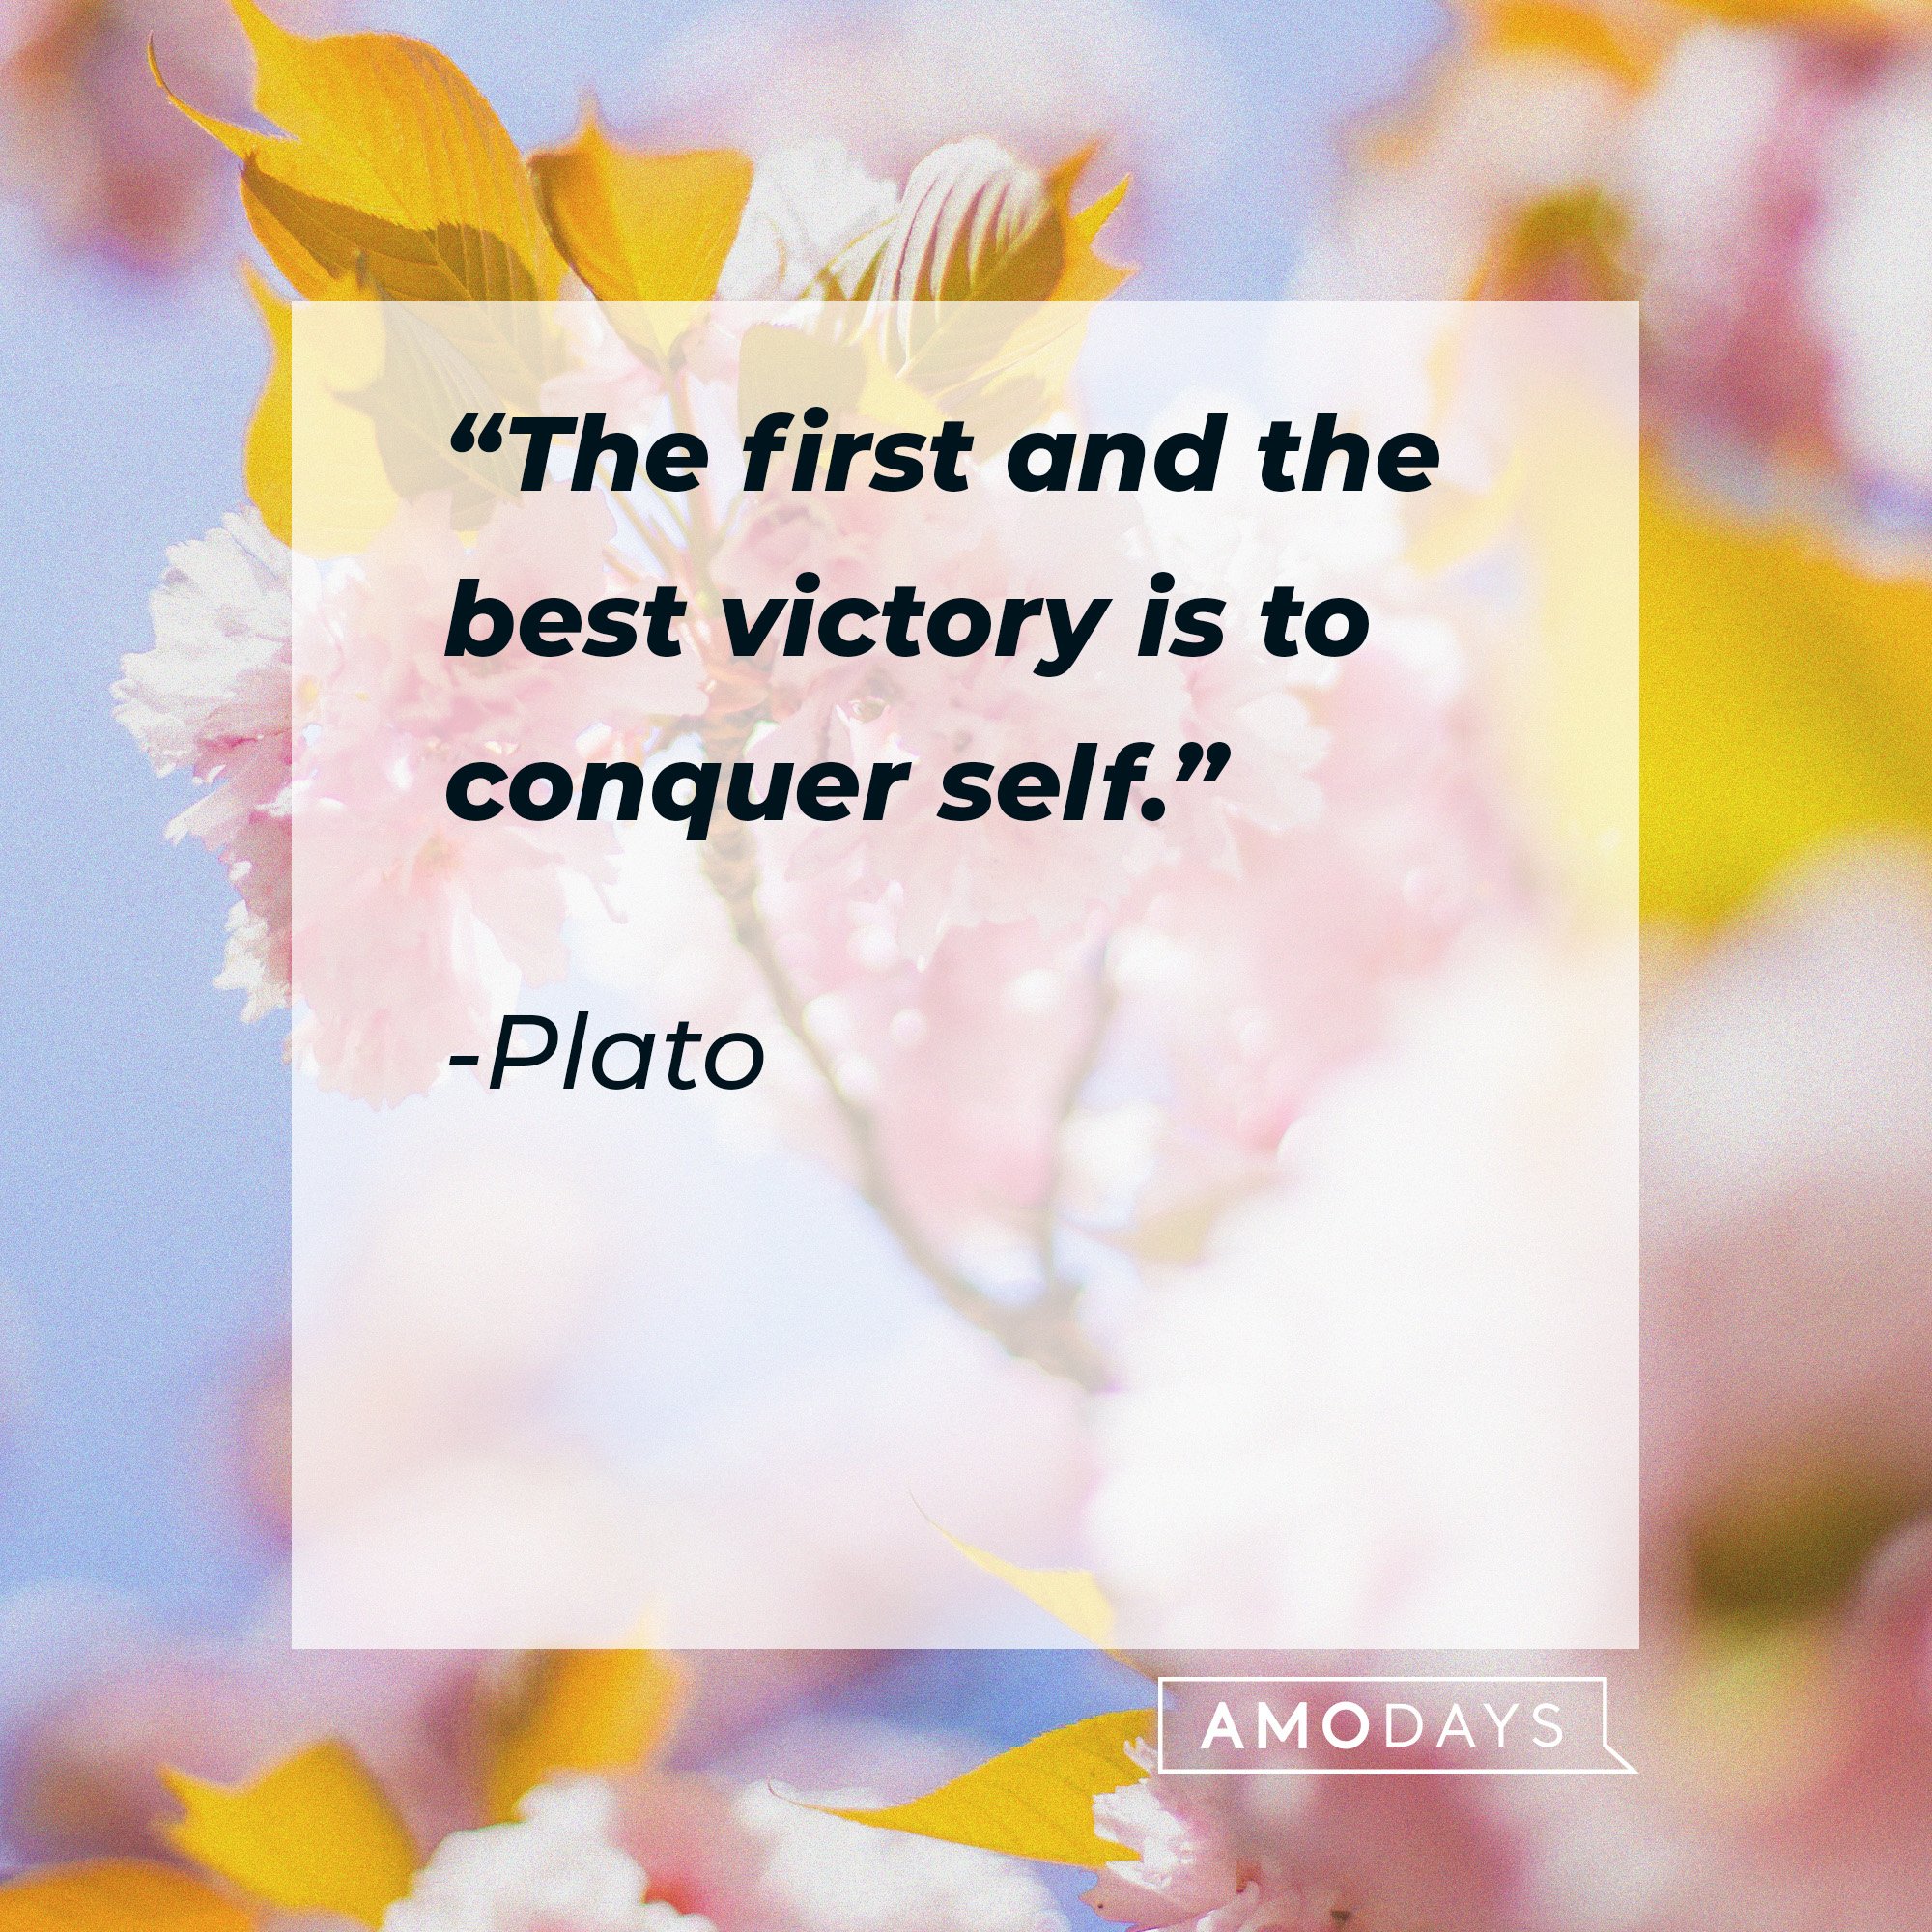 Plato's quote: “The first and the best victory is to conquer self.| Image: AmoDays